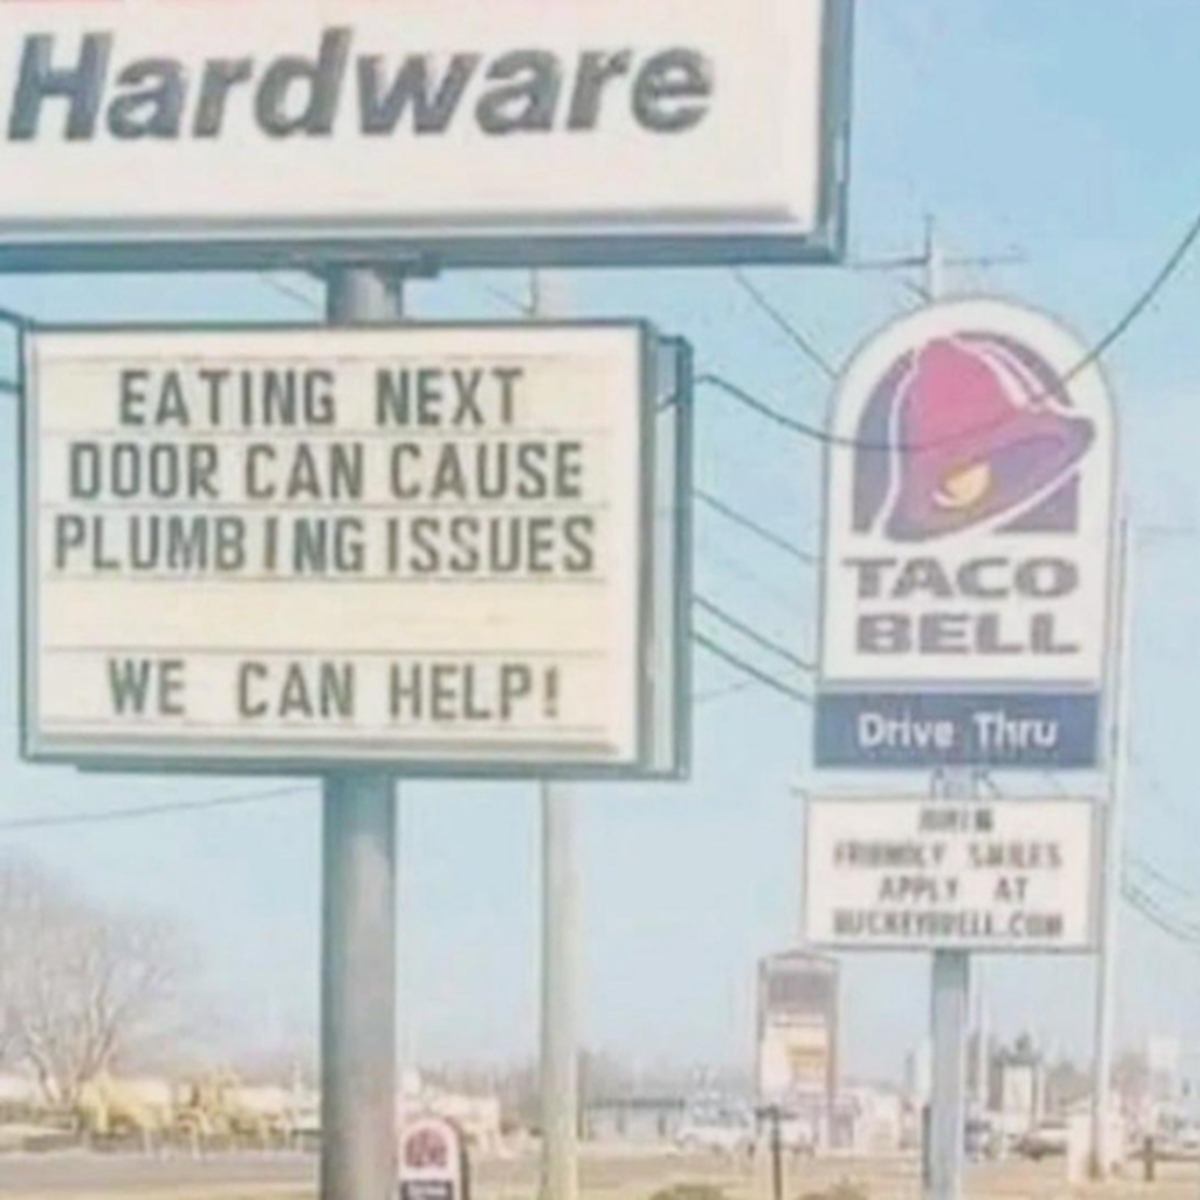 street sign - Hardware Eating Next Door Can Cause Plumbing Issues We Can Help! Taco Bell Drive Thru Fromly Sales Apply At Buckeyswell.Com